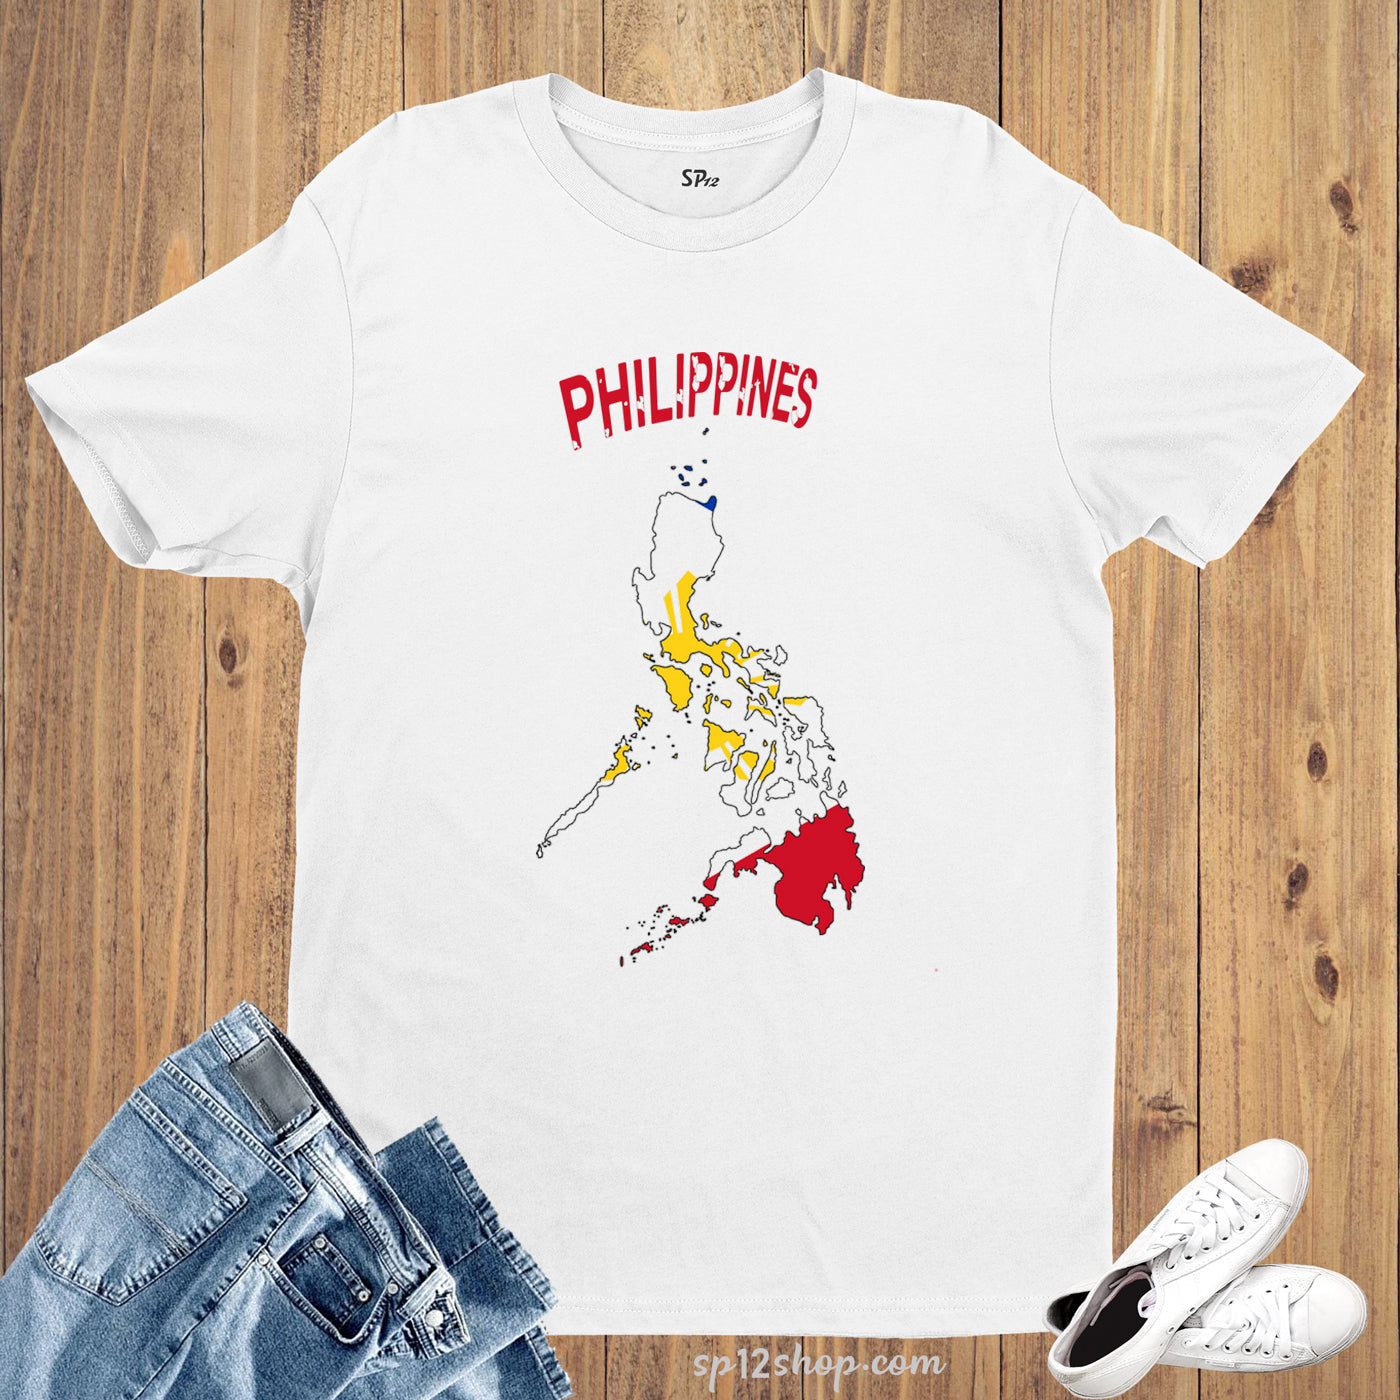 Philippines Flag T Shirt Olympics FIFA World Cup Country Flag Tee Shirt